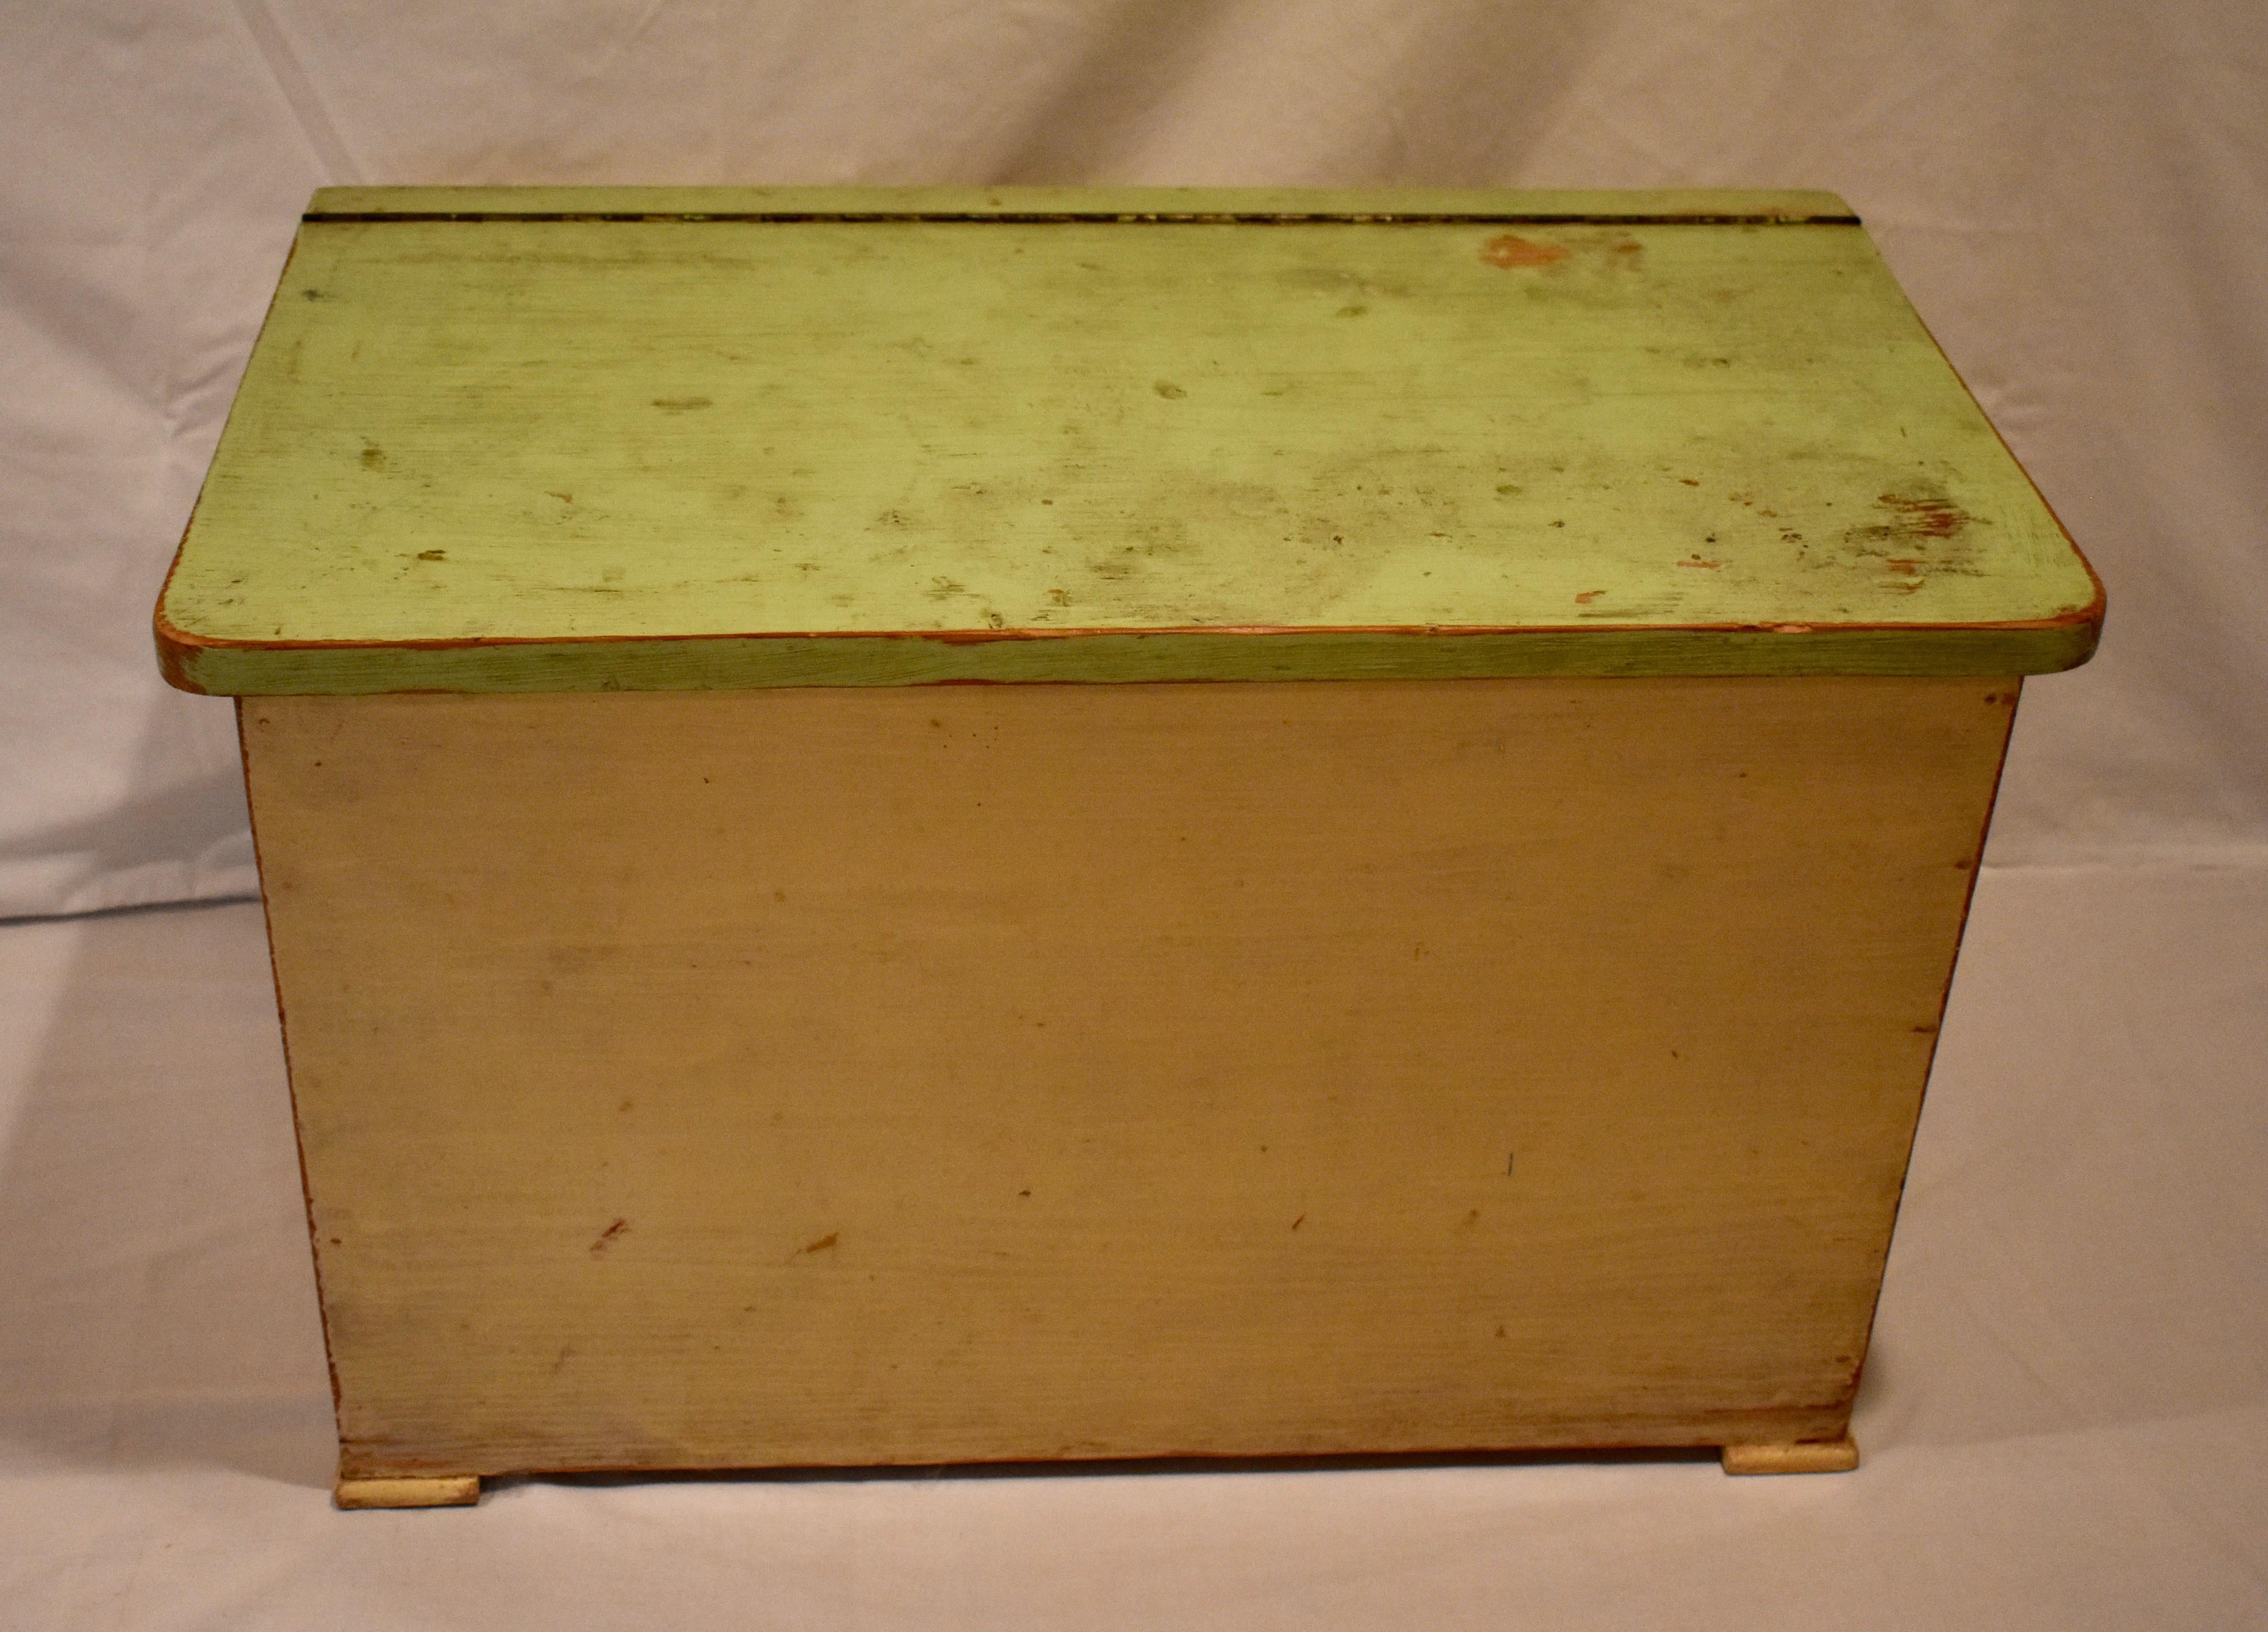 This sturdy little mortised and tenoned pine box has an attractive wedge shape, with a flat back and slightly sloping front. The lid, almost 1” thick, lifts on a brass continues hinge to access the deep storage well inside. This piece would be great